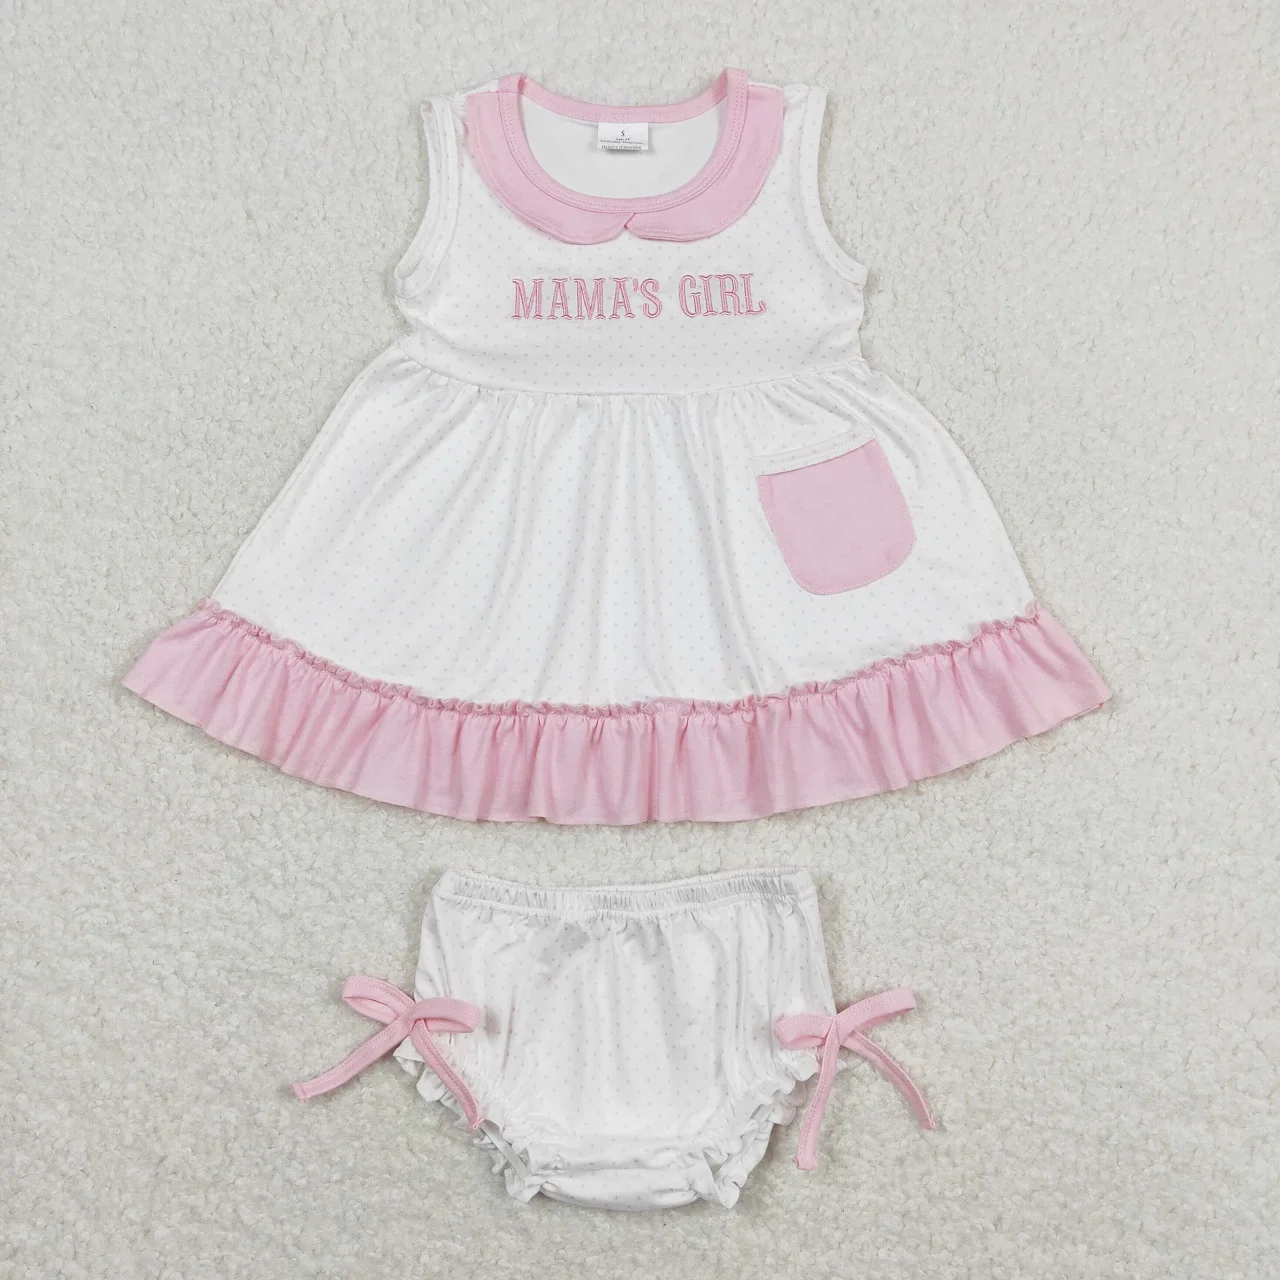 

Wholesale Infant Summer Embroidery Mama's Girl Toddler Set Kid Outfit Children Sleeveless Pocket Pink Ruffle Tunic Bummie Shorts